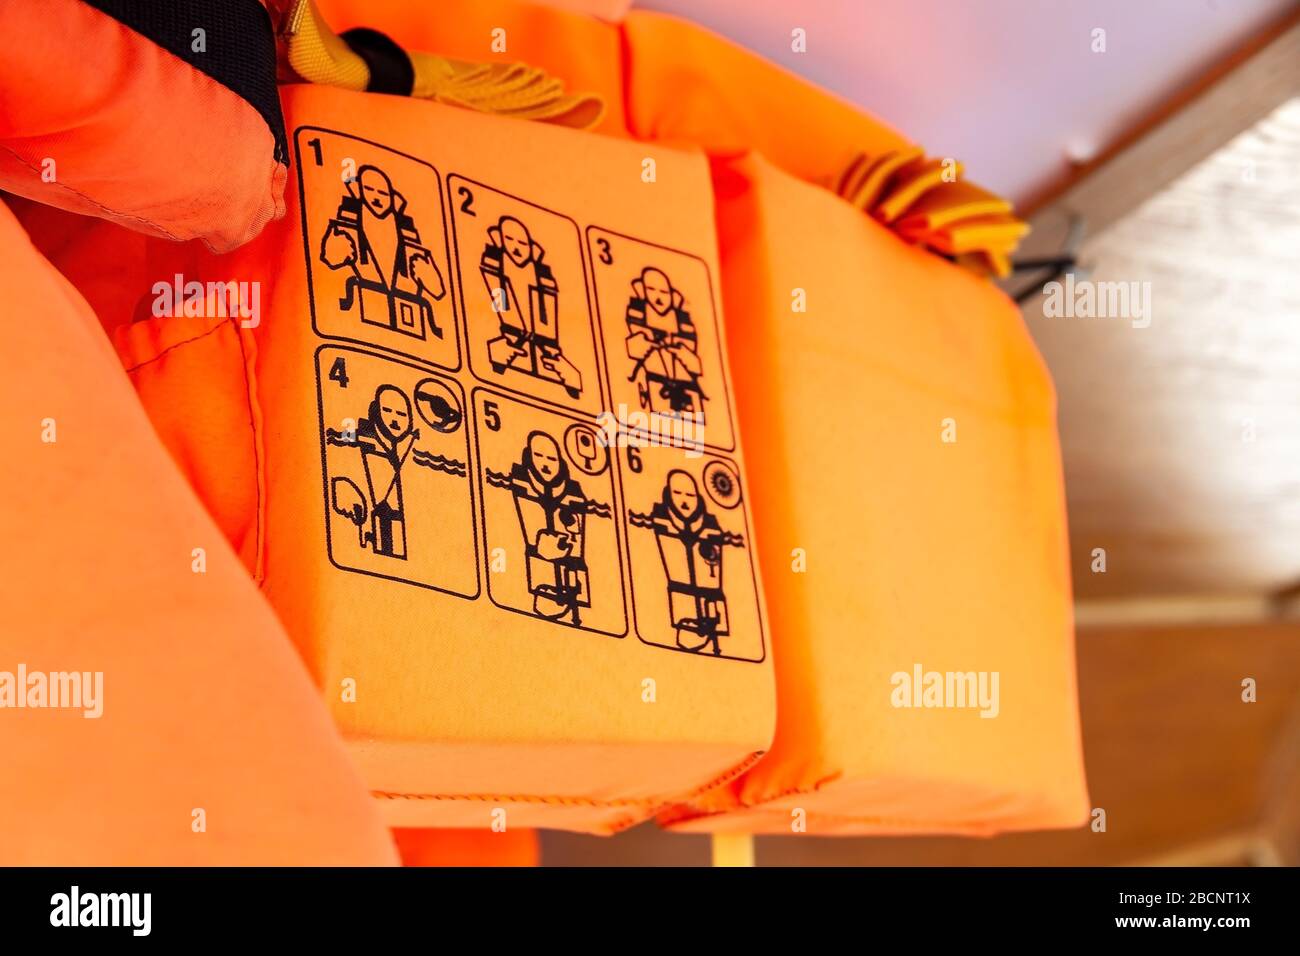 Orange life vests on a ship, closeup on the use instructions, detail How to put on, putting on a life jacket, shallow dof. Personal flotation device Stock Photo